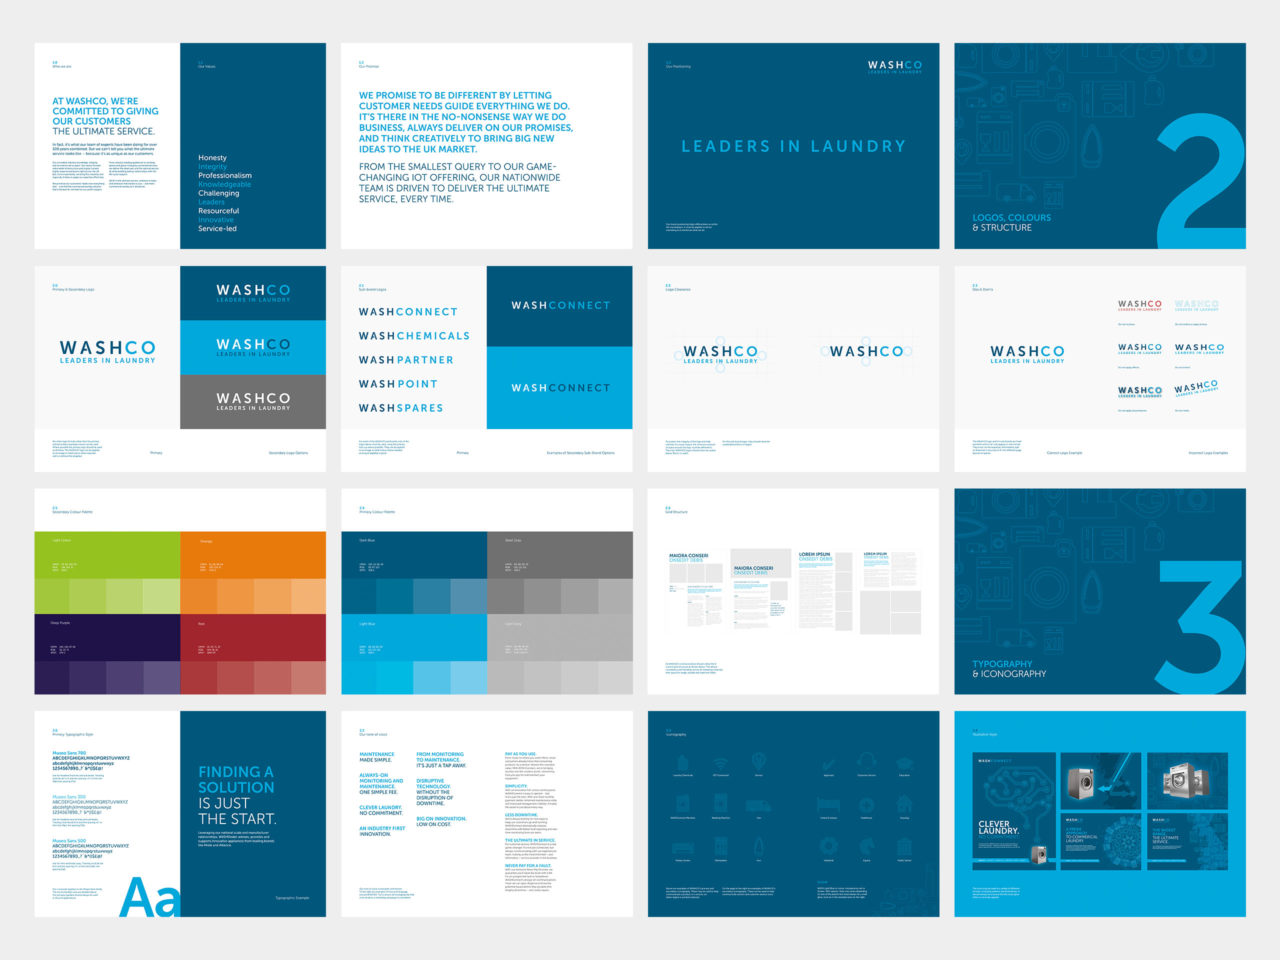 Image of pages from WashCo's new brand guidelines document